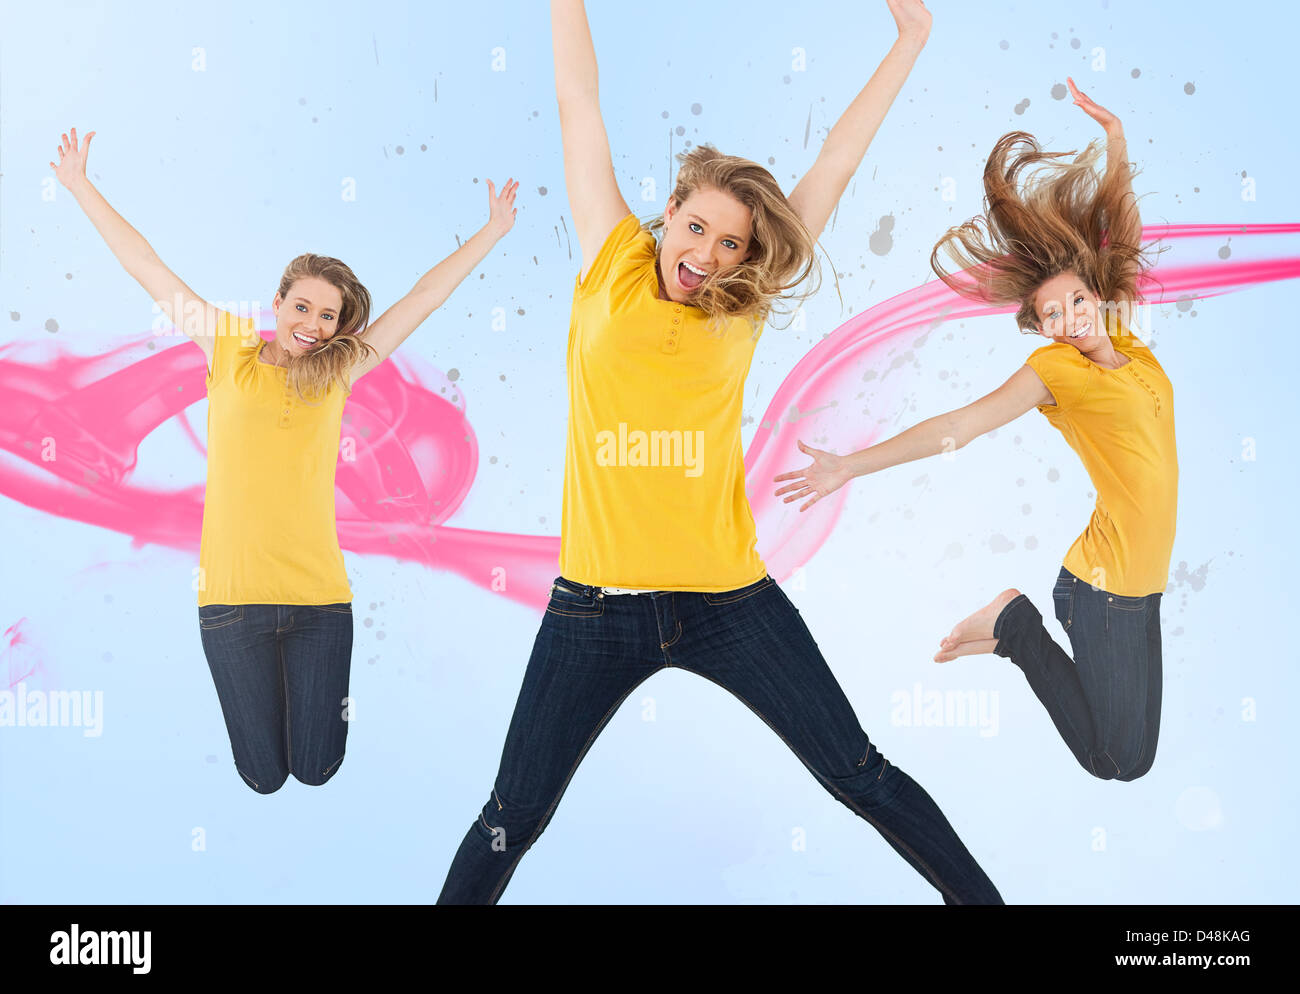 Three of the same young woman jumping for joy Stock Photo